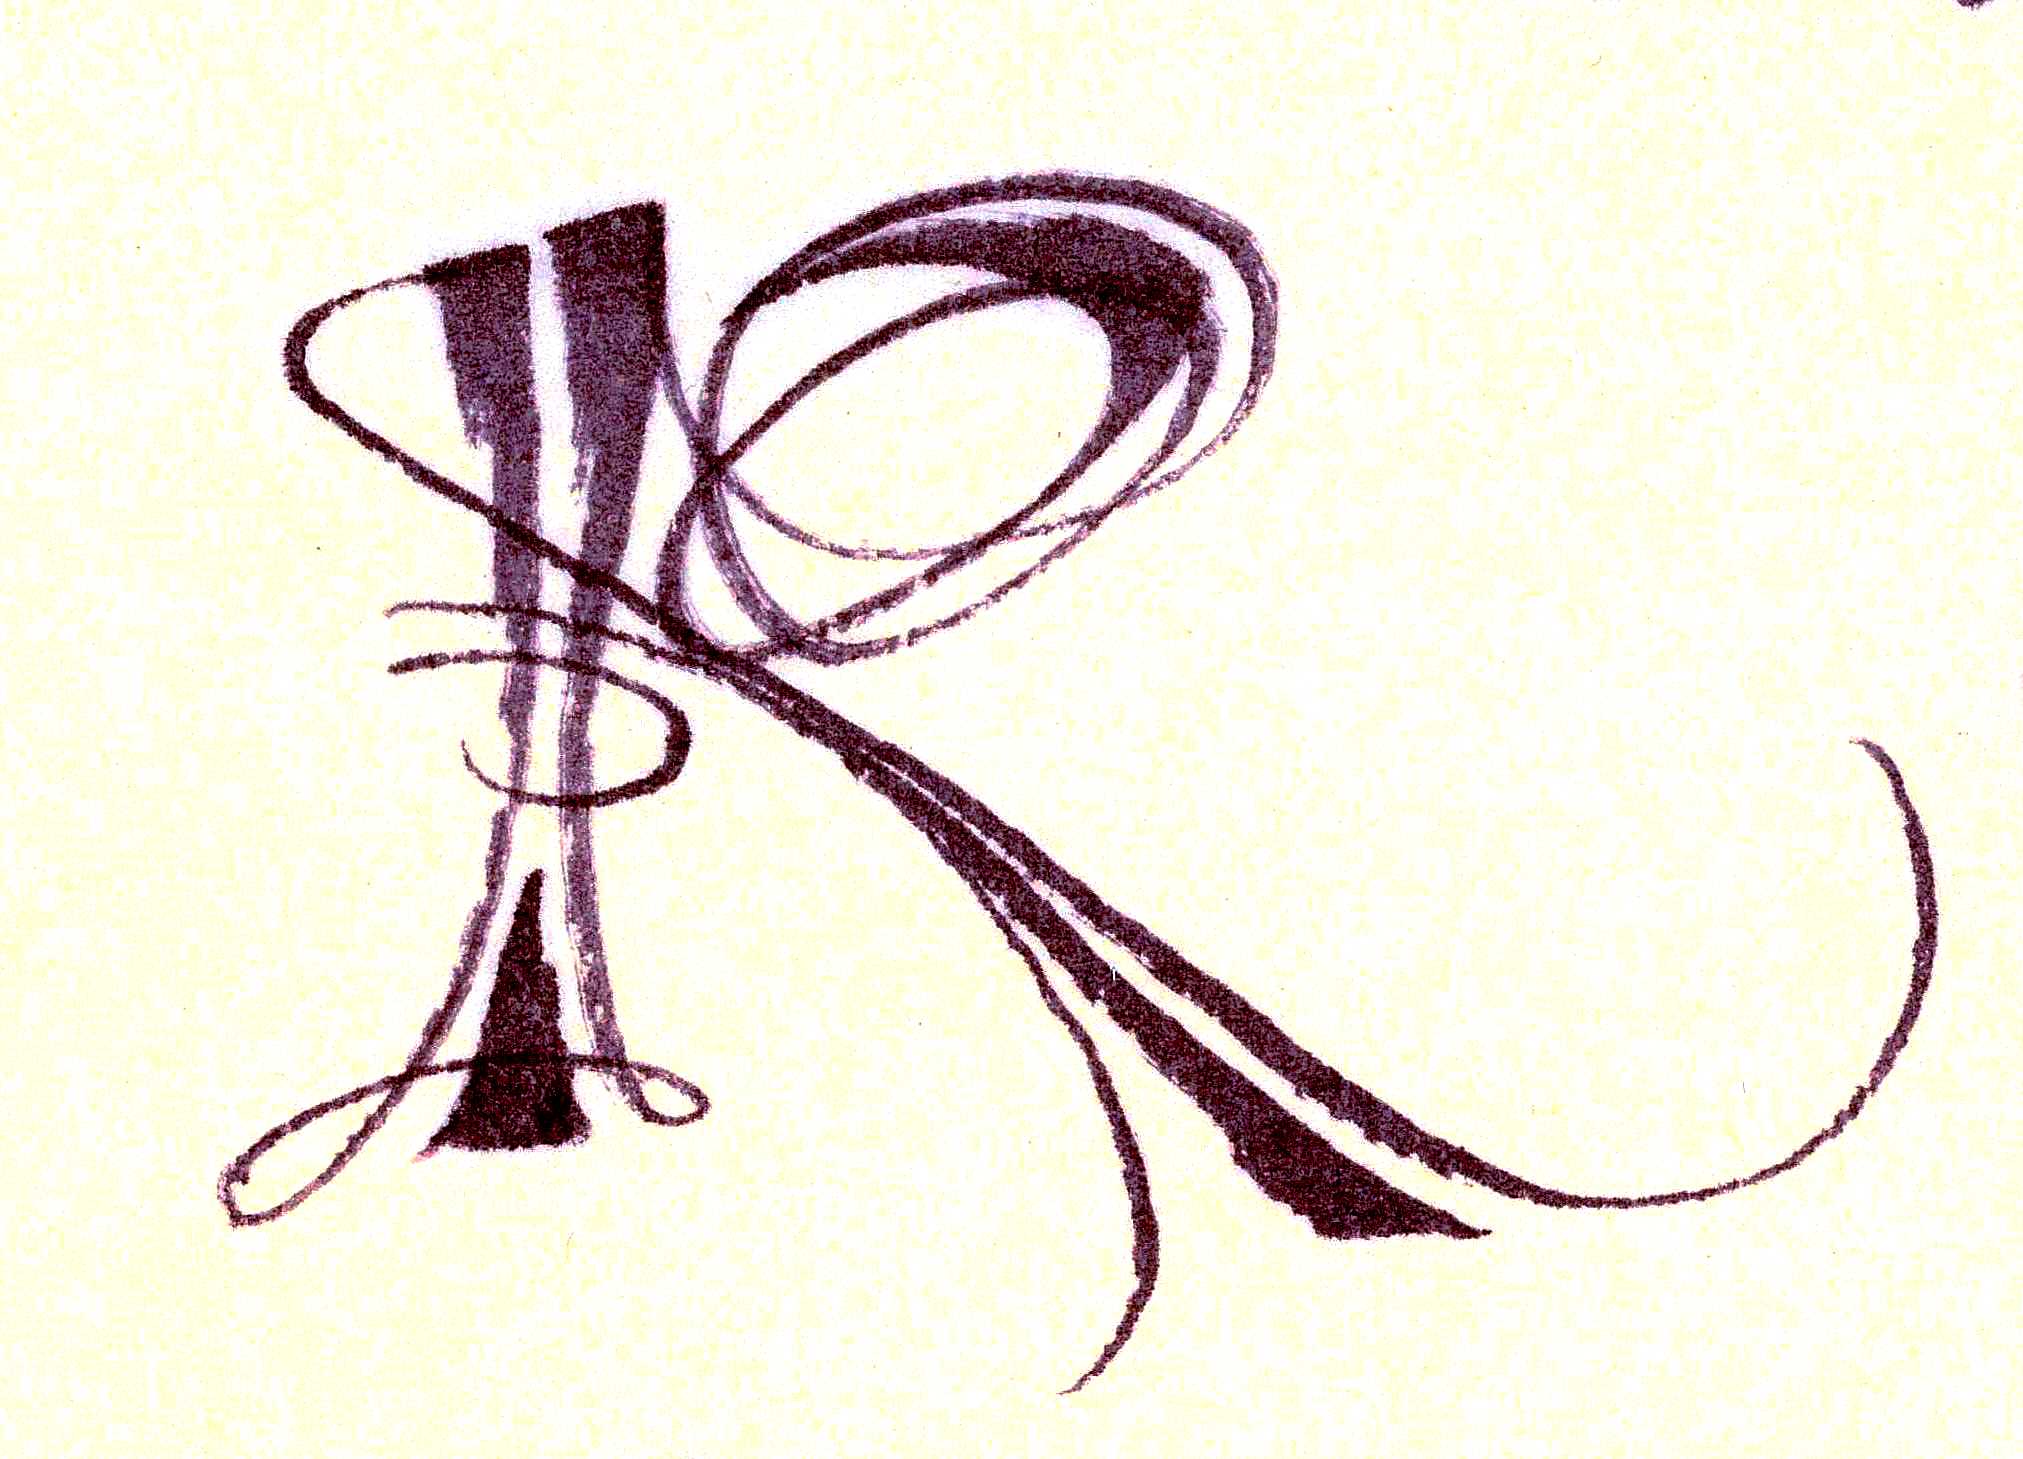 Decorative letter R drawn by hand.